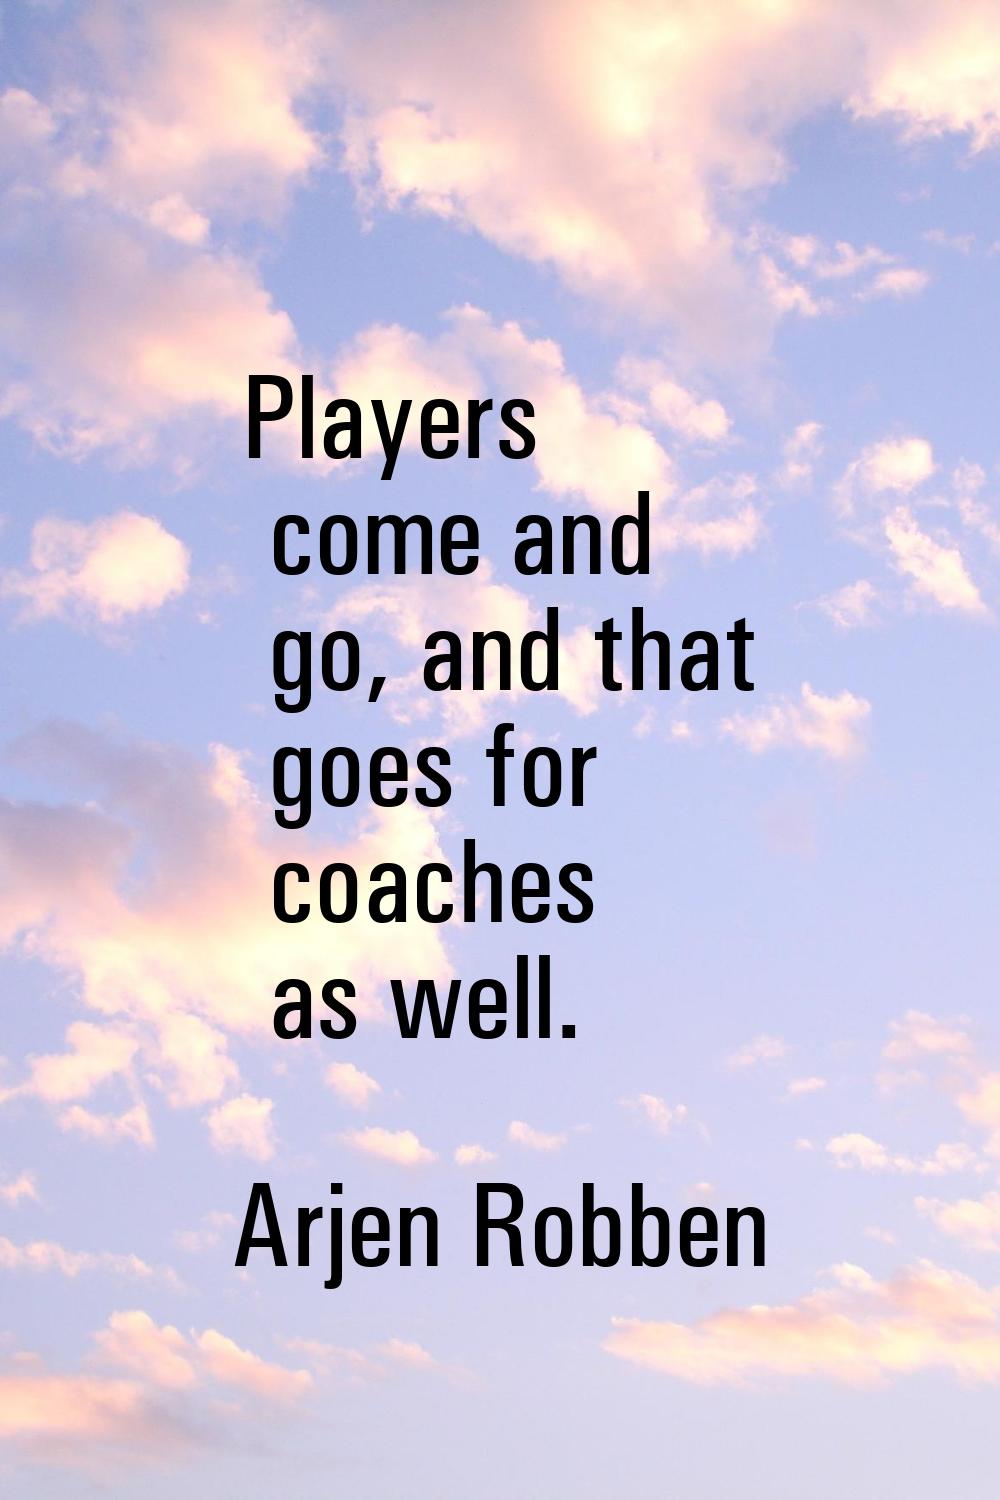 Players come and go, and that goes for coaches as well.